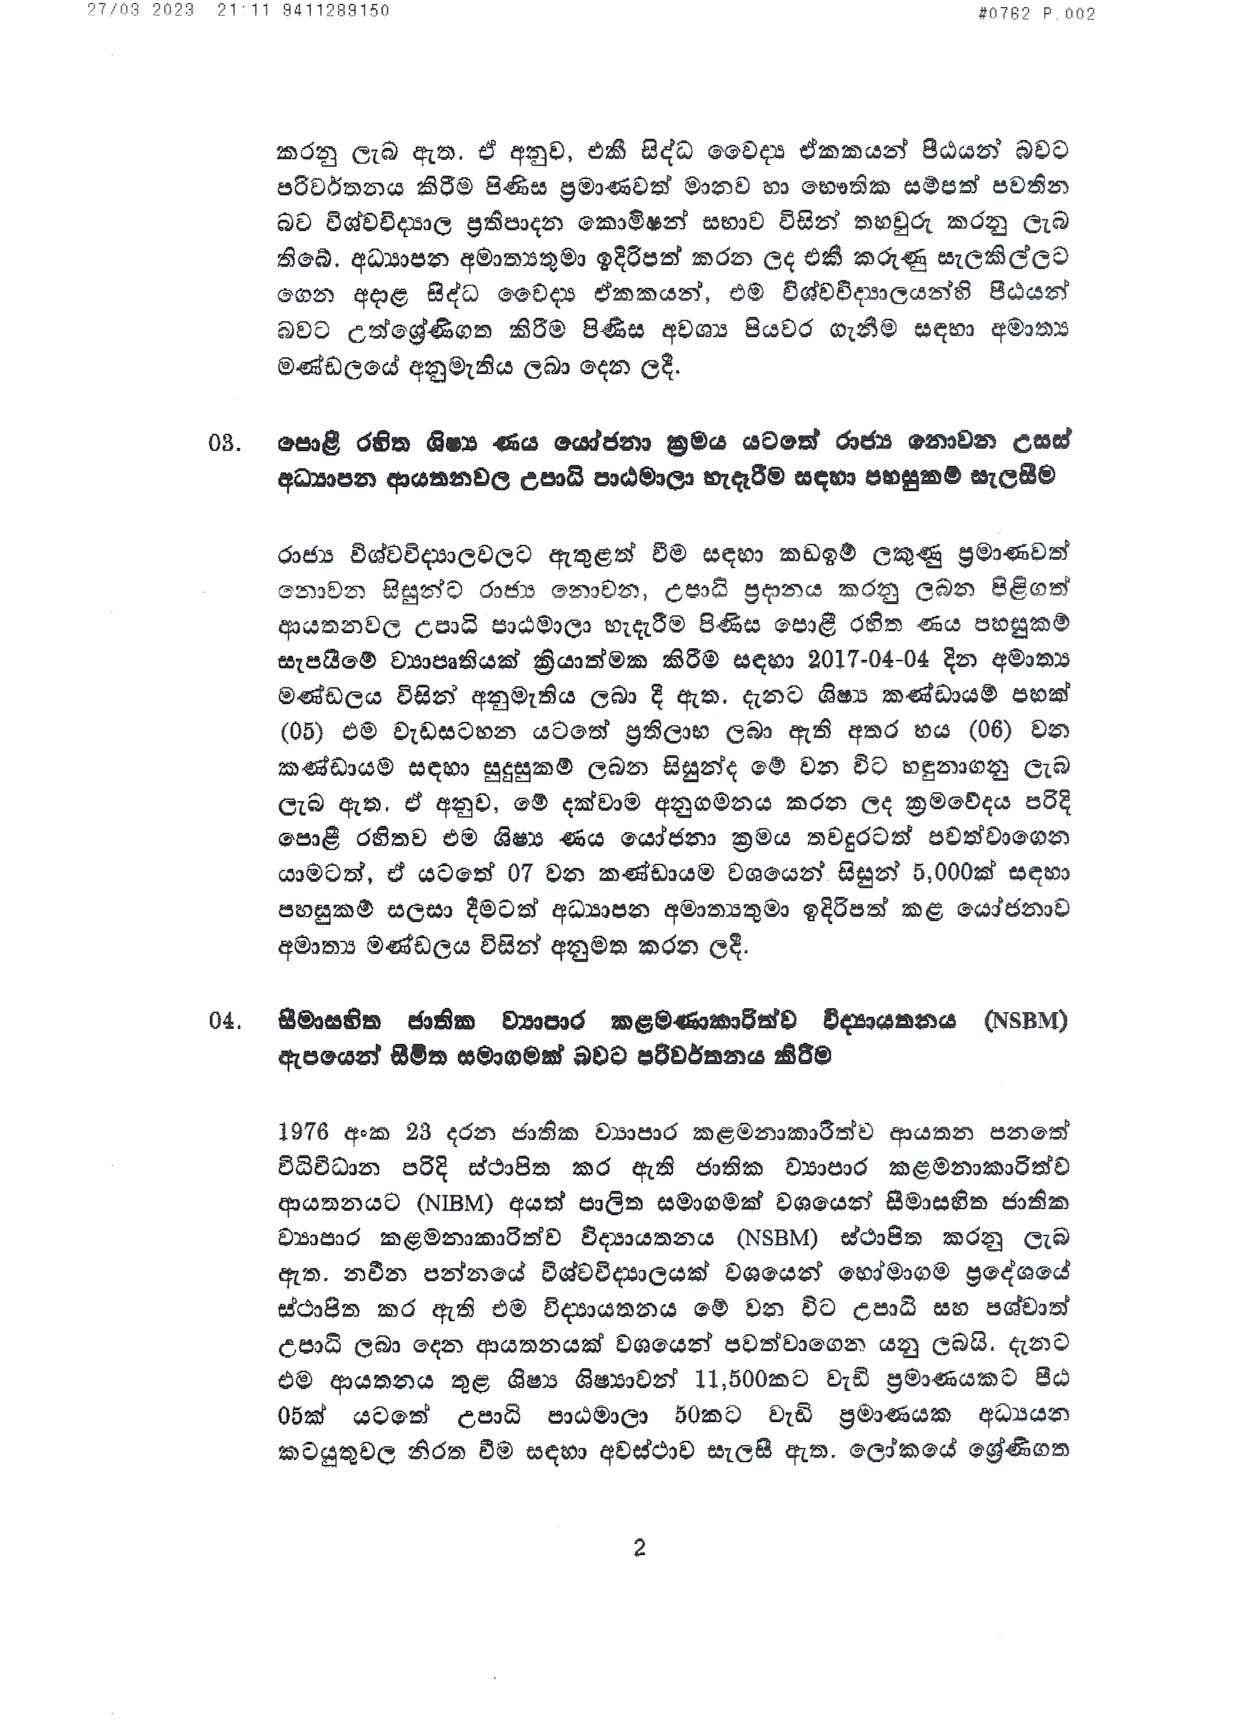 Cabinet Decision on 27.03.2023 page 002